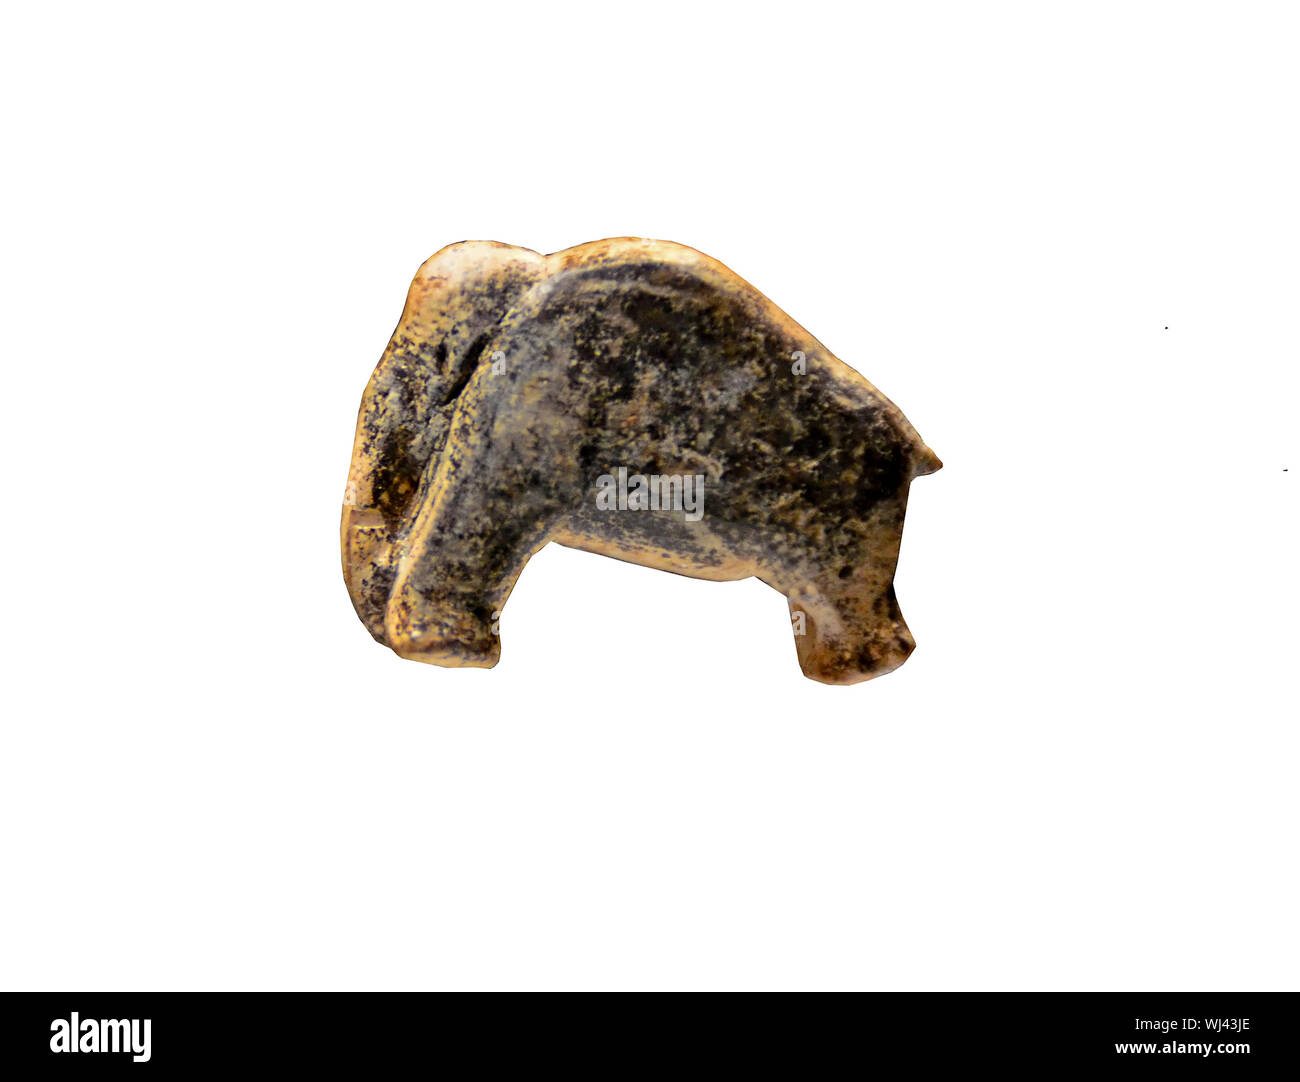 The tiny but beautiful Vogelherd Mammoth figurine, dating from around 35,000 years ago. Sculted from Mammoth Ivory. Isolated against a white backgroun Stock Photo